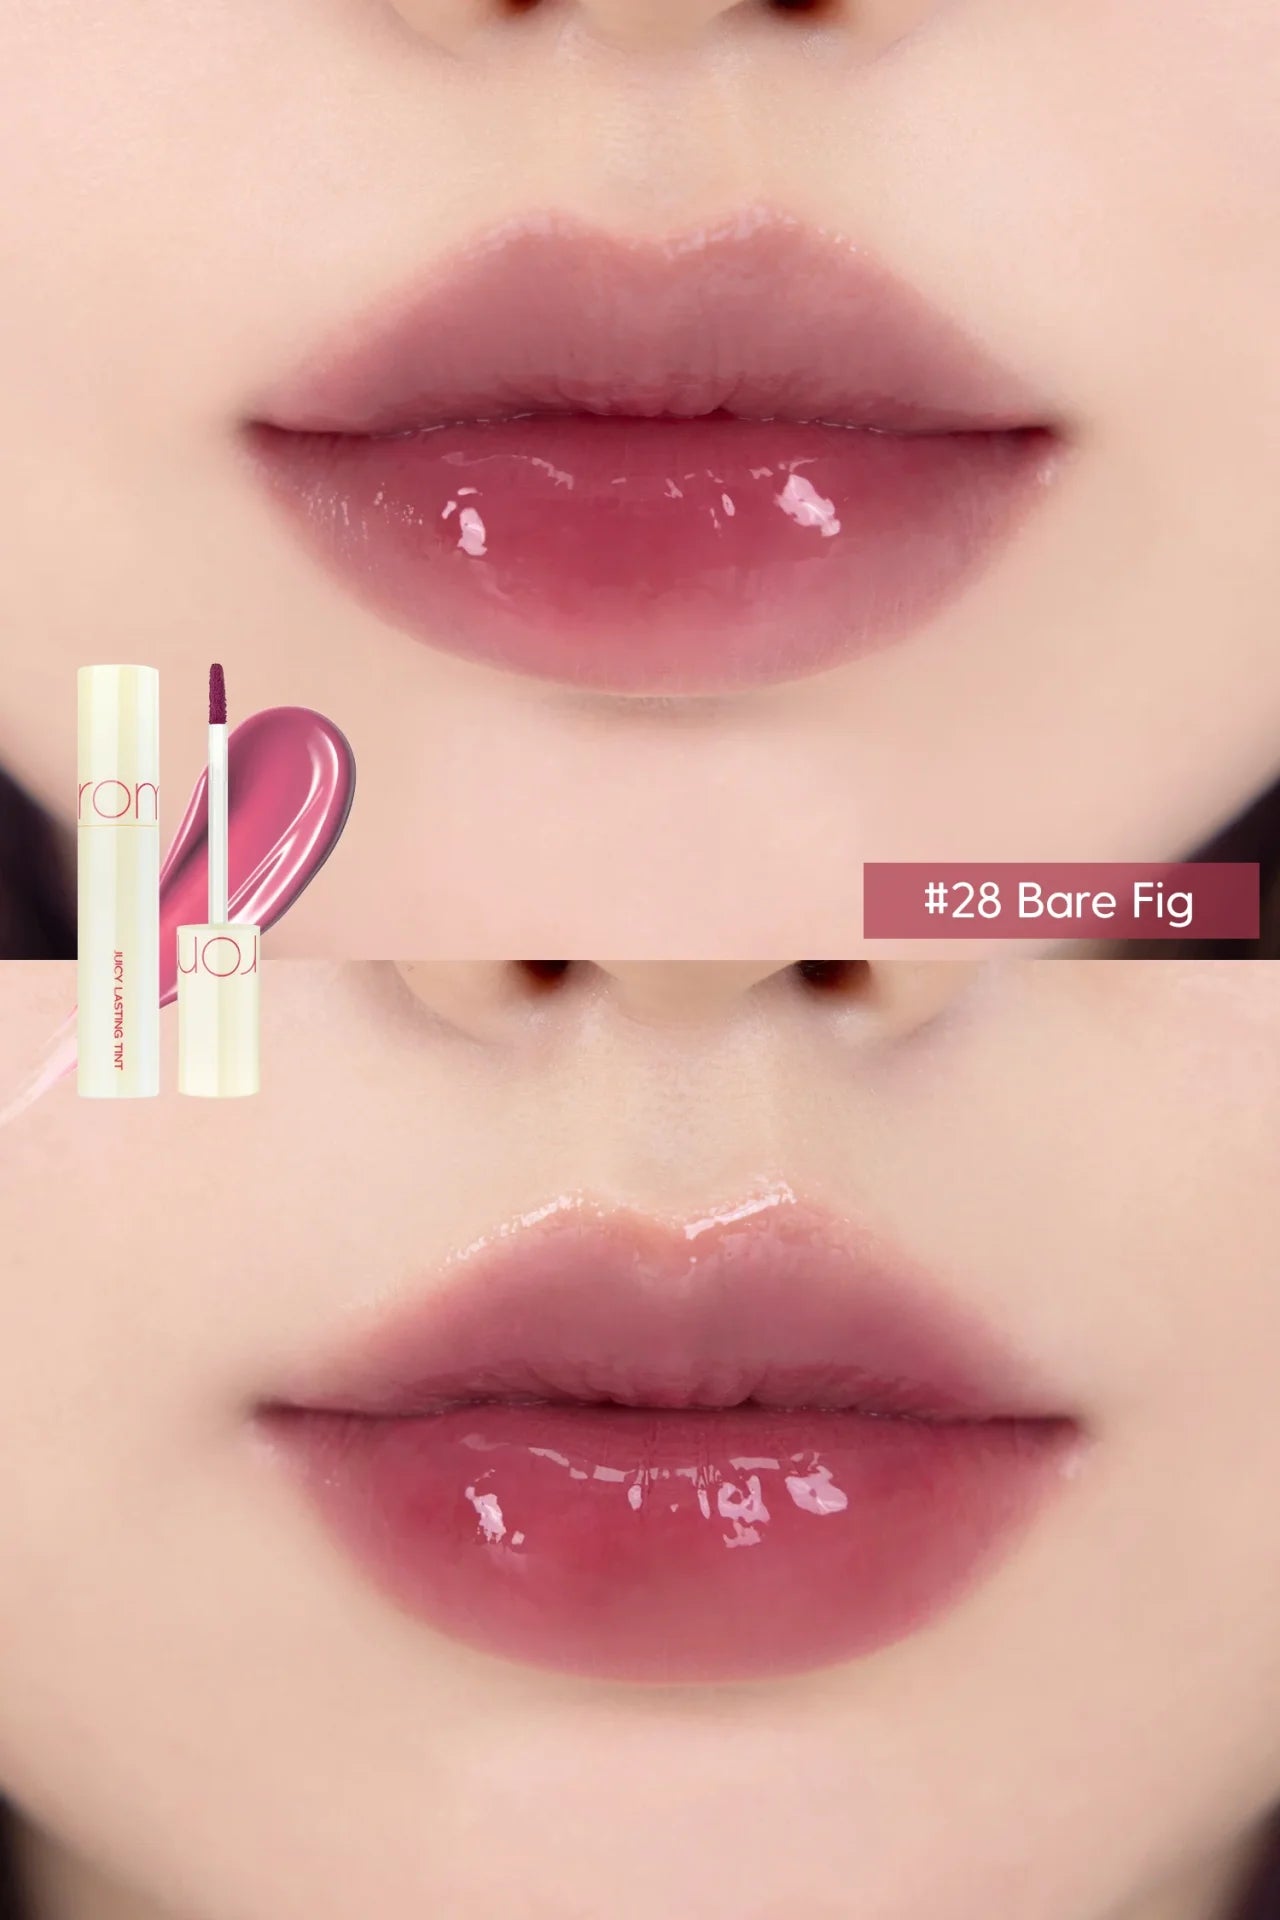 JUICY LASTING TINT 28 BARE FIG - ROM&ND